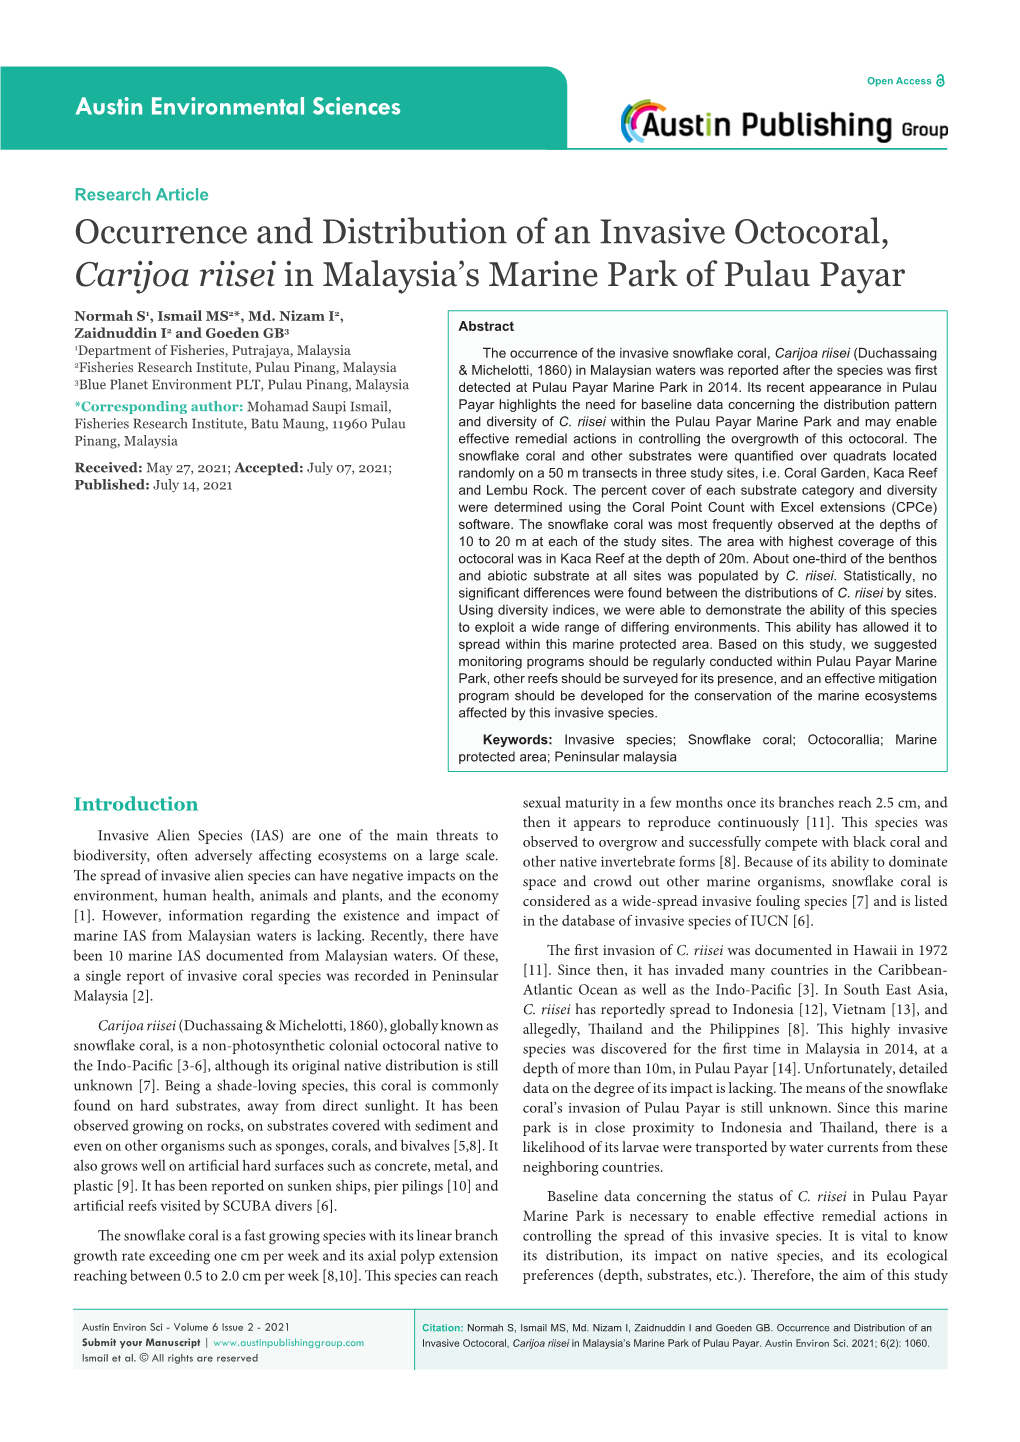 Occurrence and Distribution of an Invasive Octocoral, Carijoa Riisei in Malaysia's Marine Park of Pulau Payar